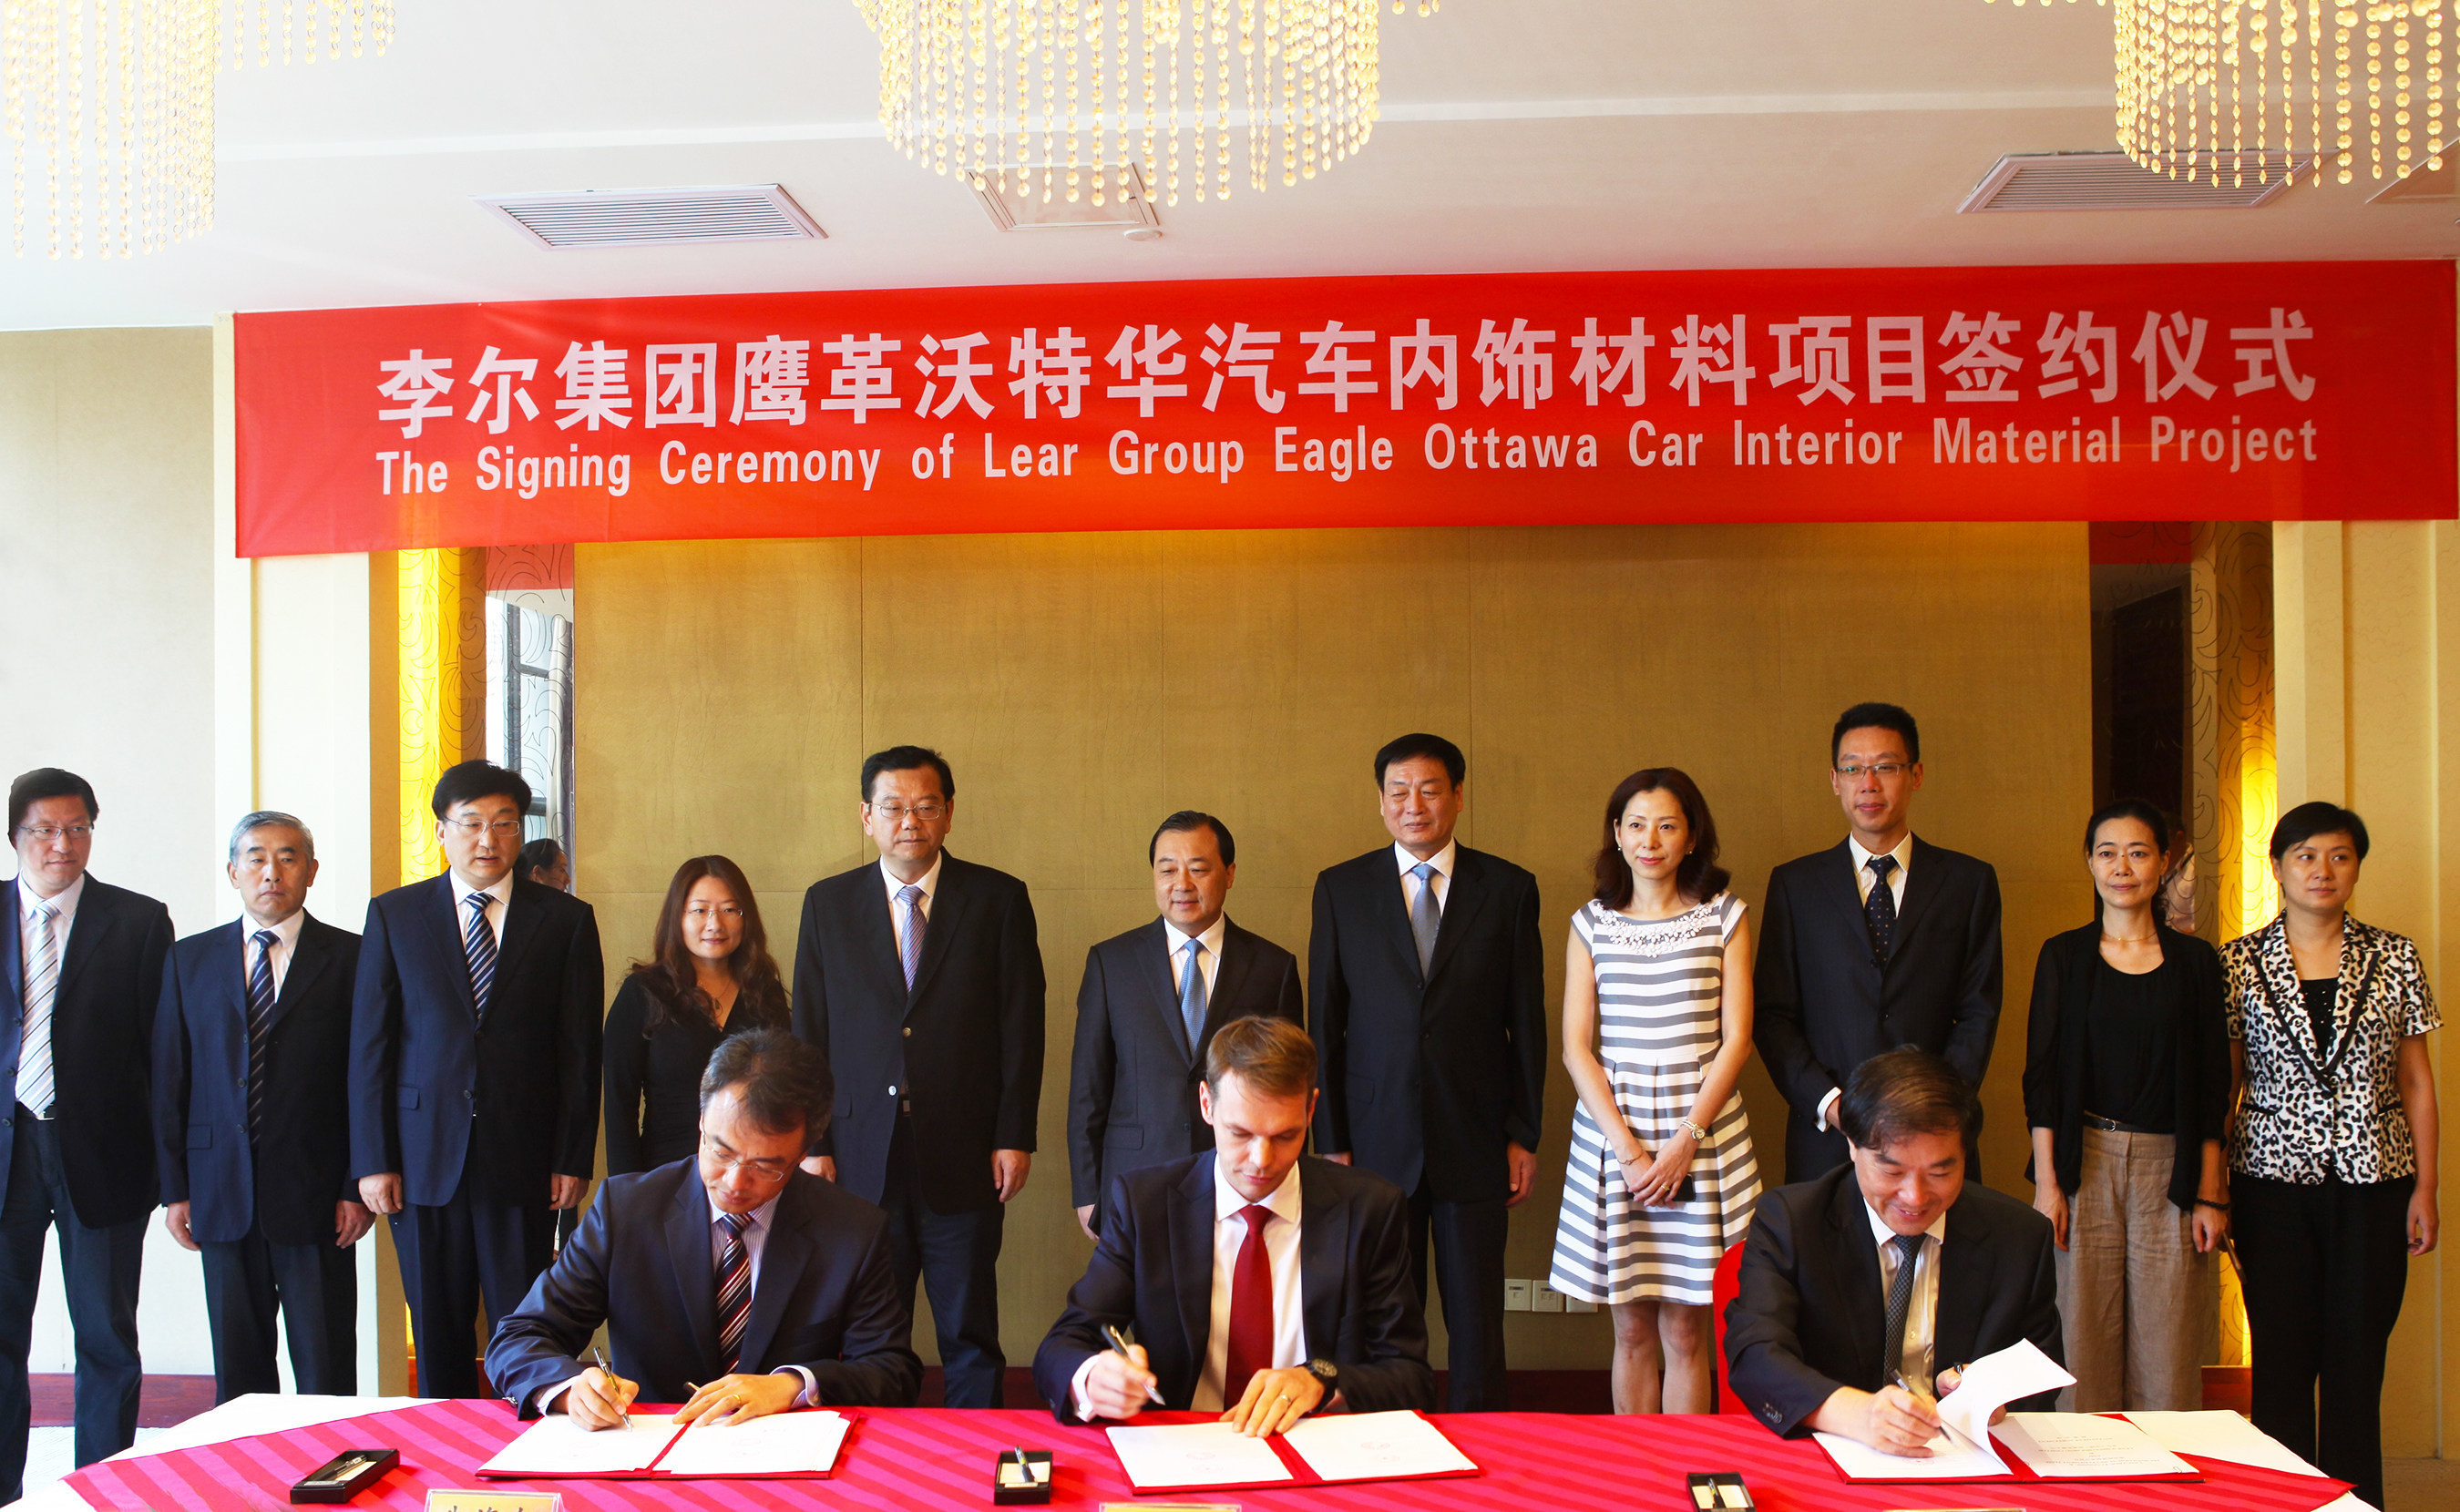 Lear Corporation Signing Ceremony with Administrative Commission of Yangzhou Economic & Technological Development Zone. First row from left to right: Haydon Zhu (VP of Finance, Eagle Ottawa Asia and Lear ASEAN), Carsten Pfuhl (CFO Asia, Lear Corporation) and  Xi Chen (Director of the Administrative Committee of Yangzhou Economic and Technological Development Zone).